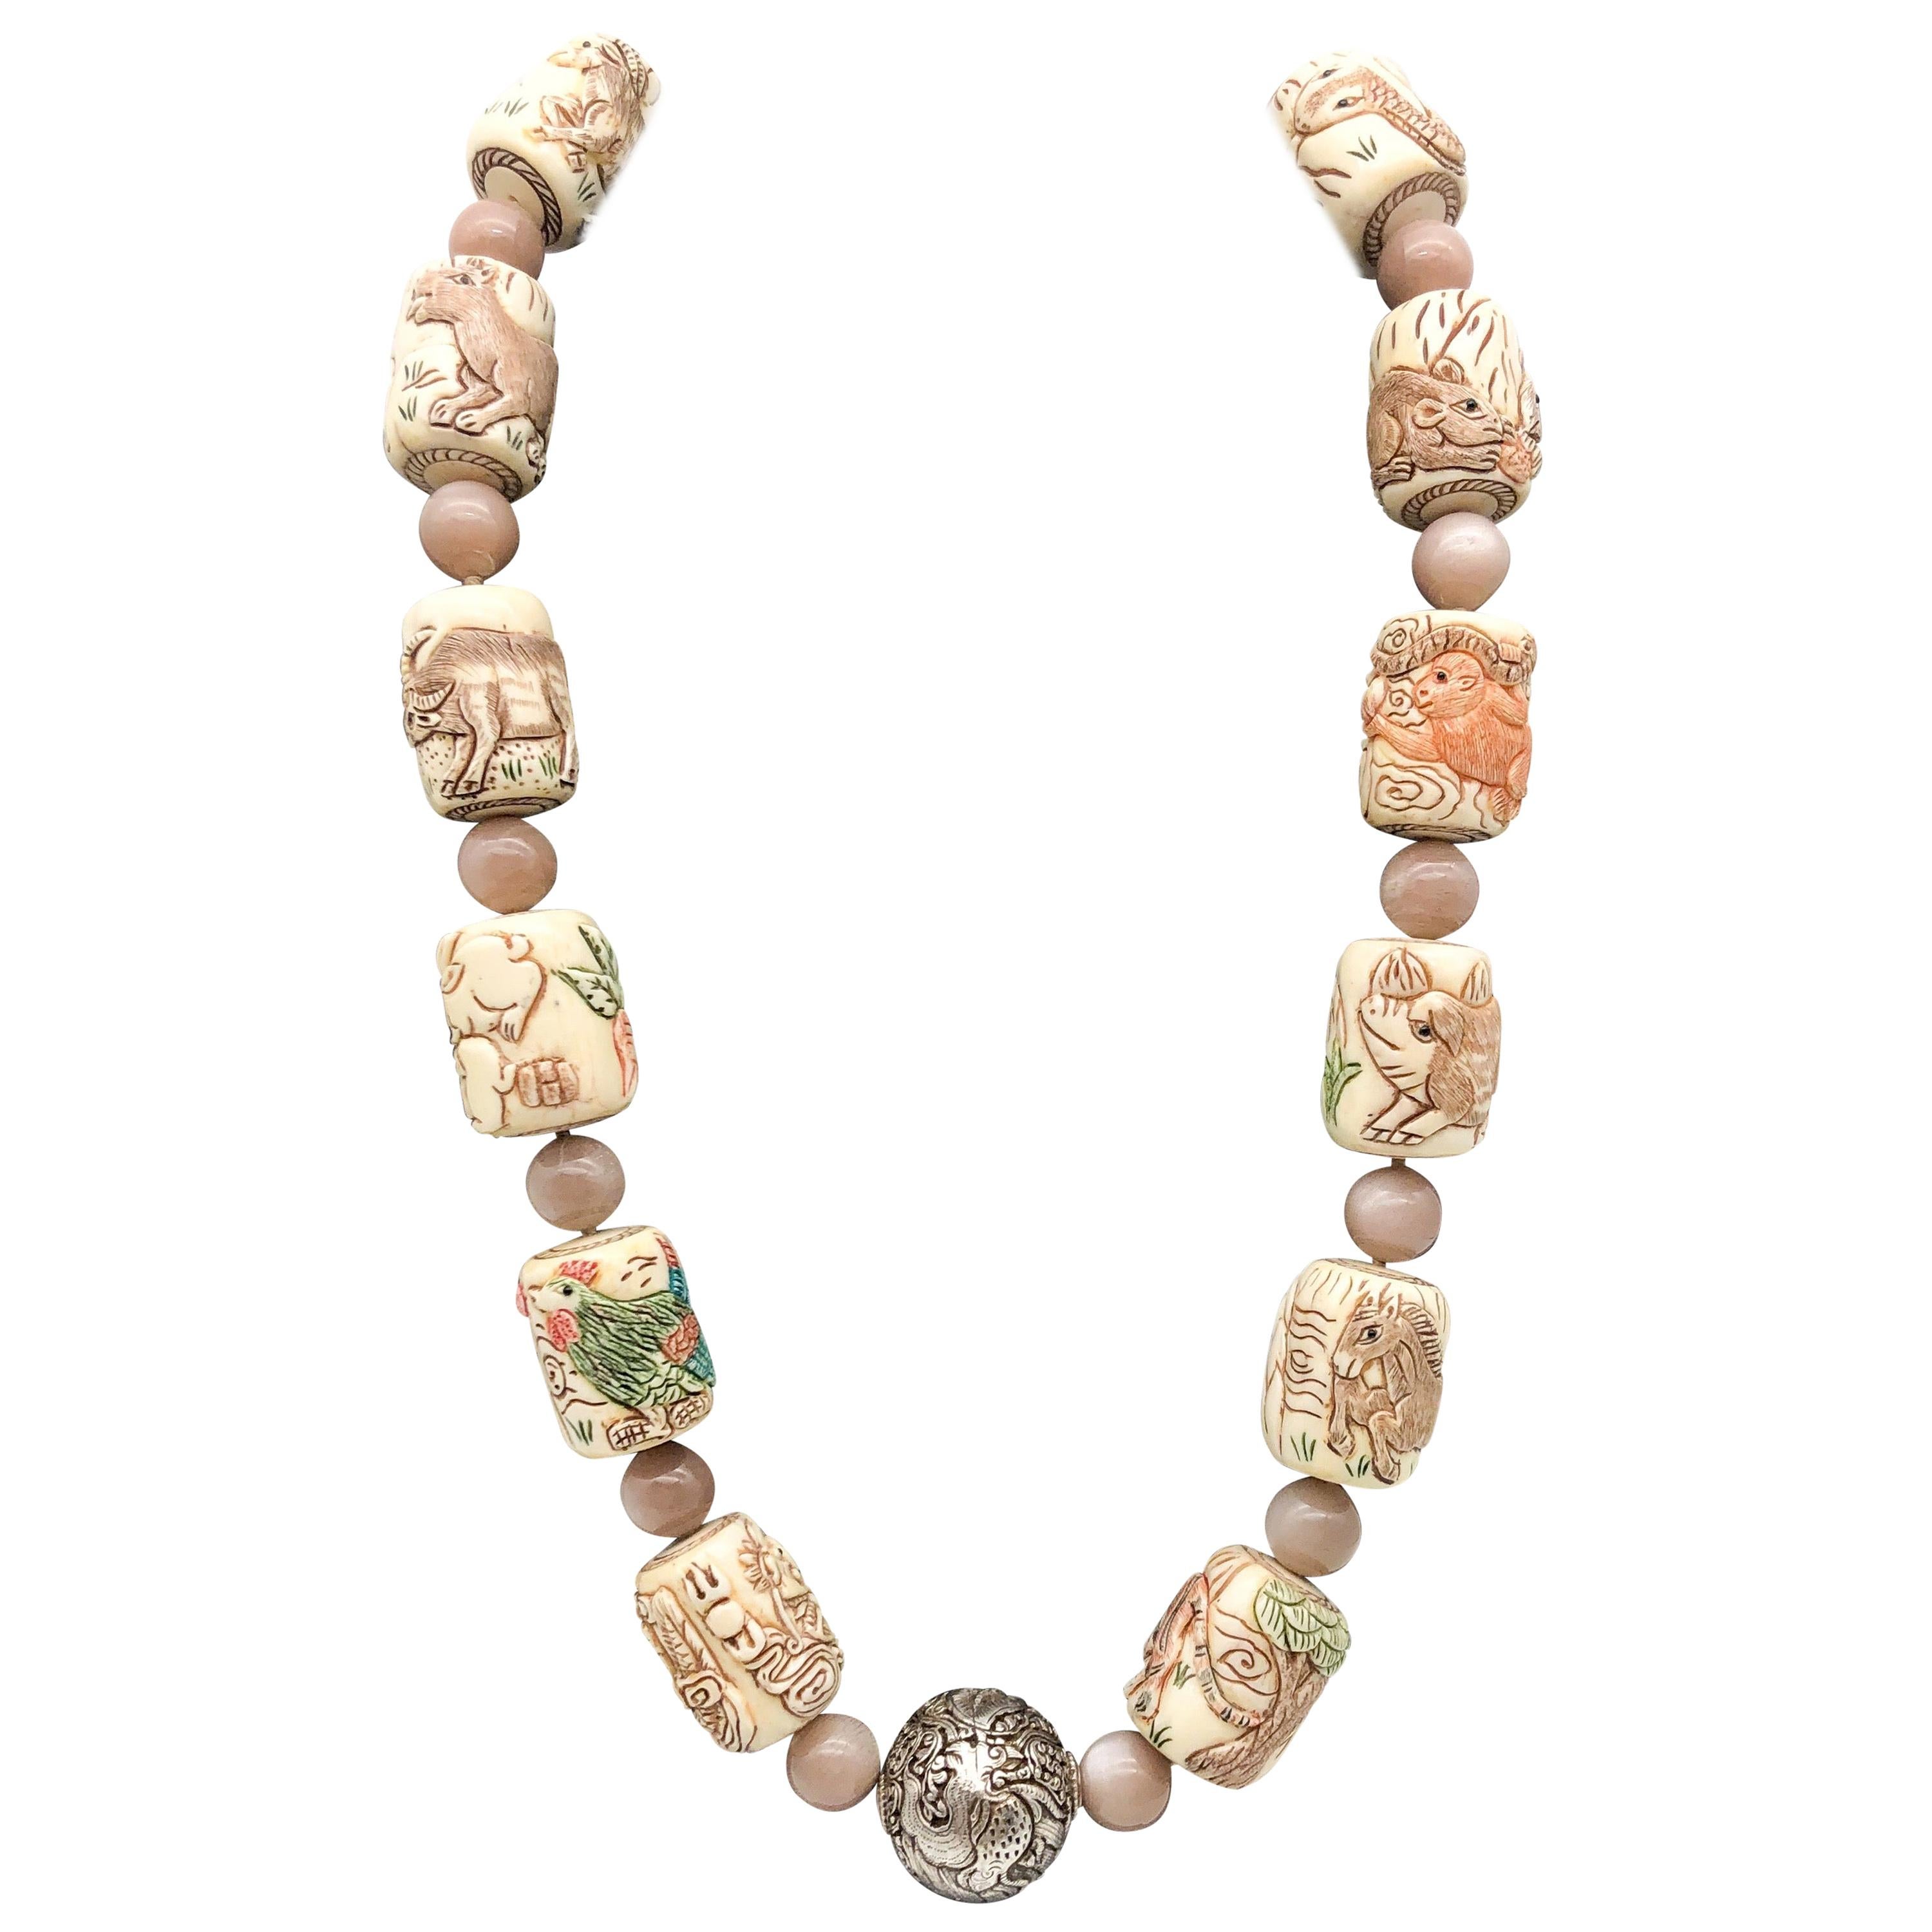 A.Jeschel Moonstone necklace with Chinese Zodiac symbols